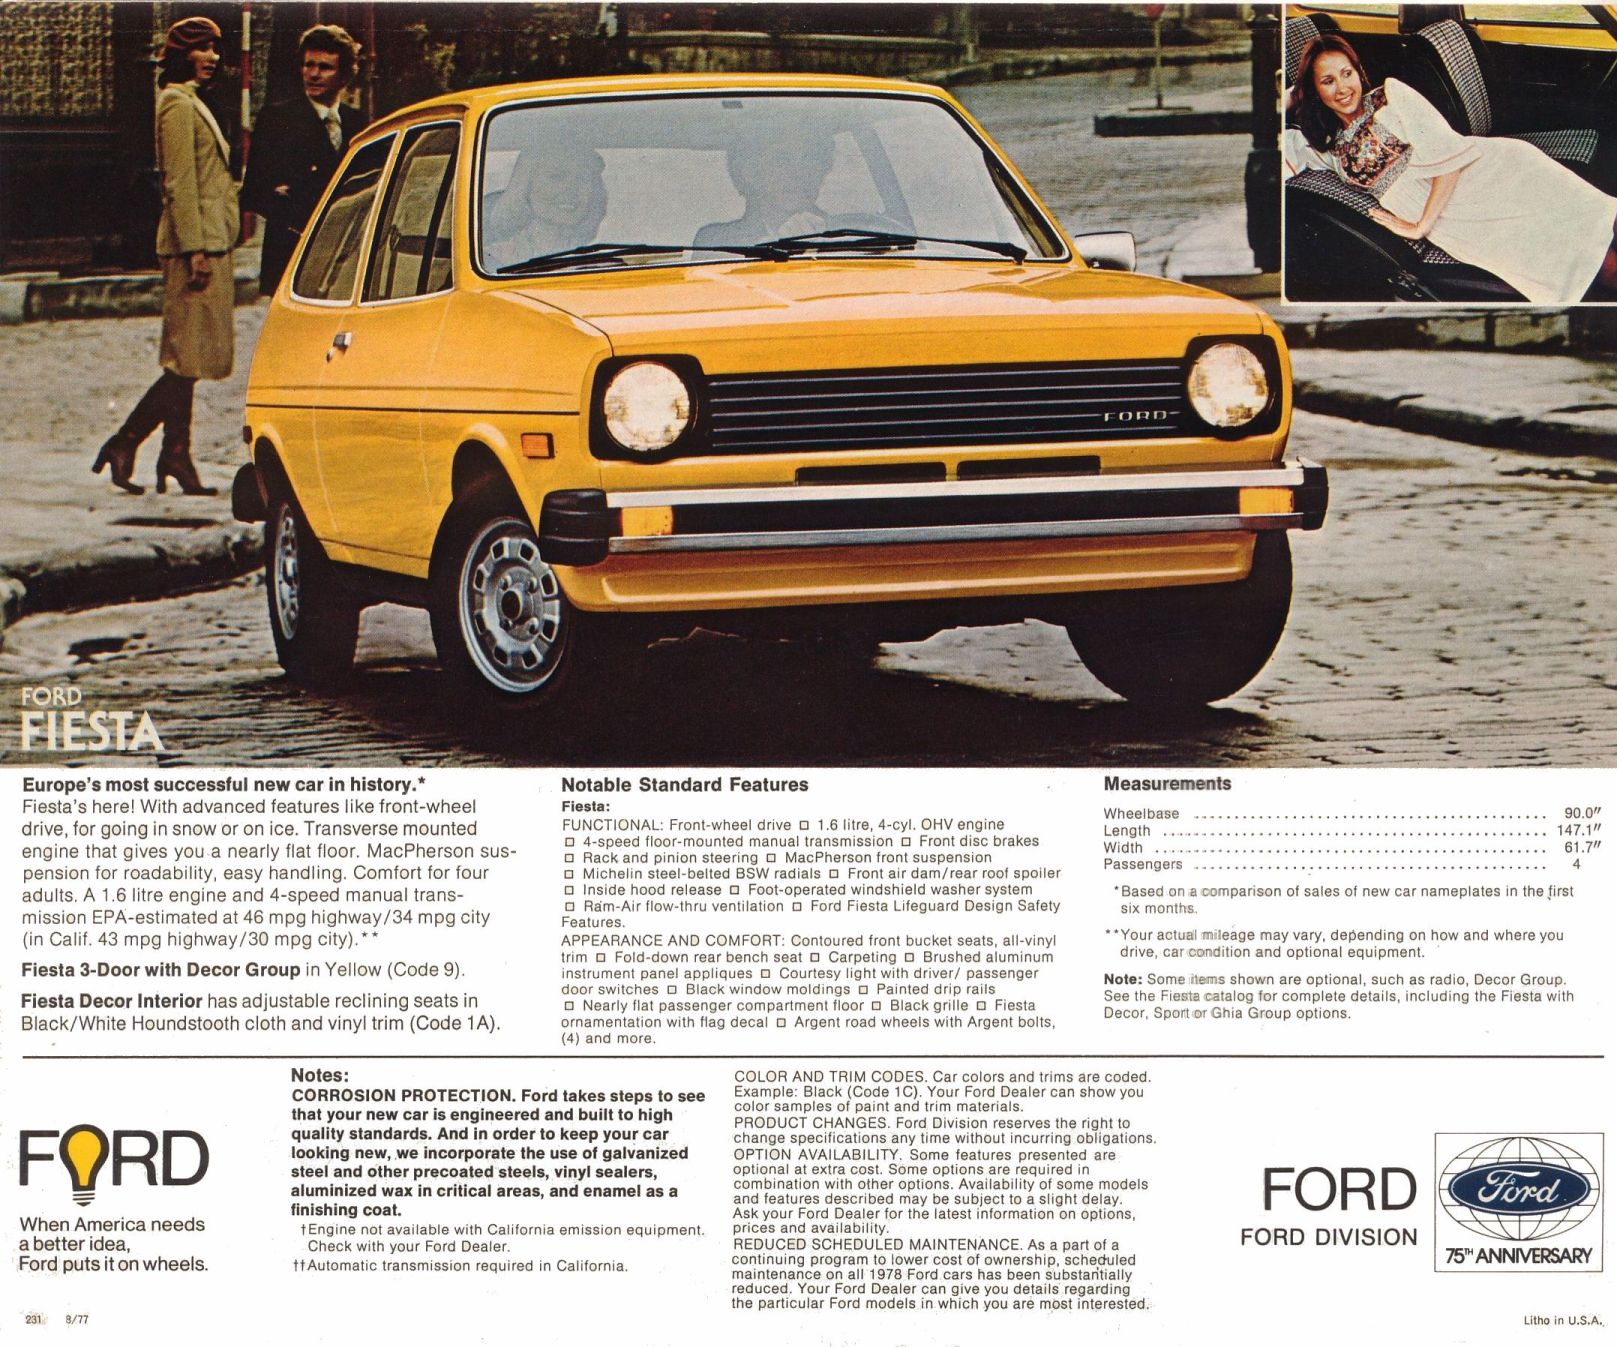 1978_Ford_Foldout-08